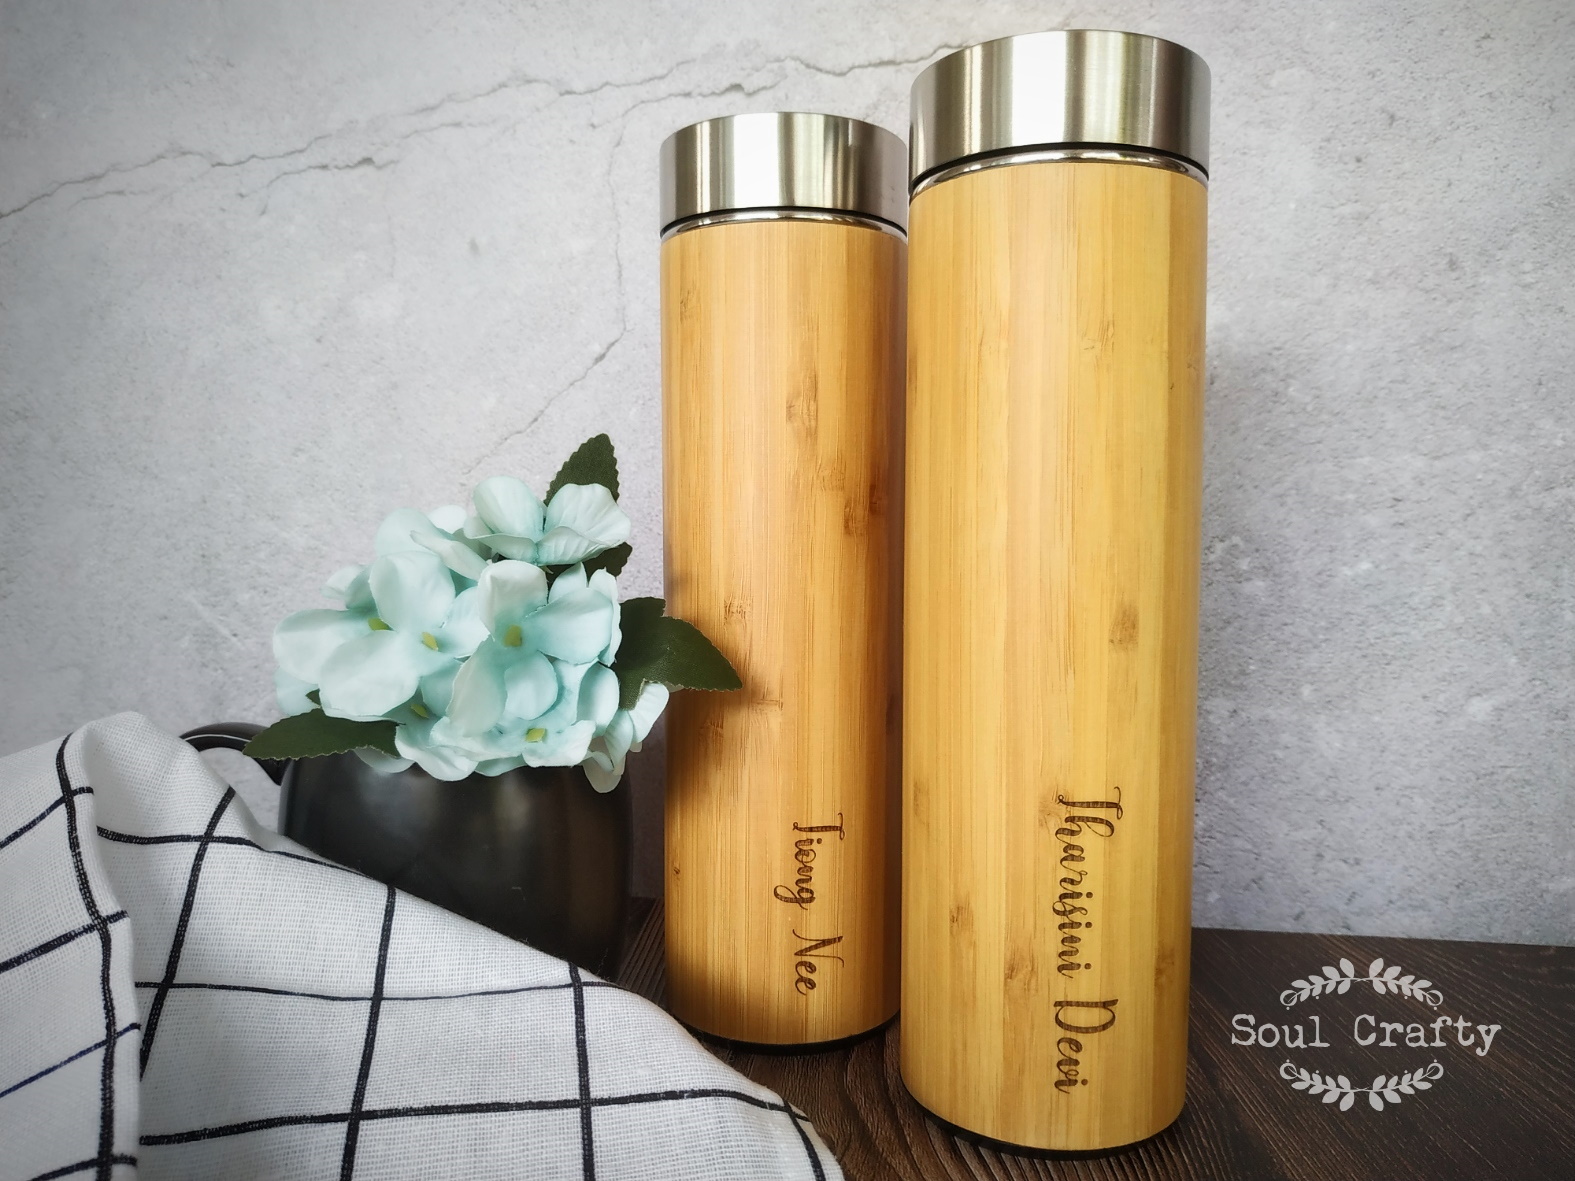 https://www.soulcrafty.com/wp-content/uploads/2021/03/bamboo_flask_engraved_cement.jpg